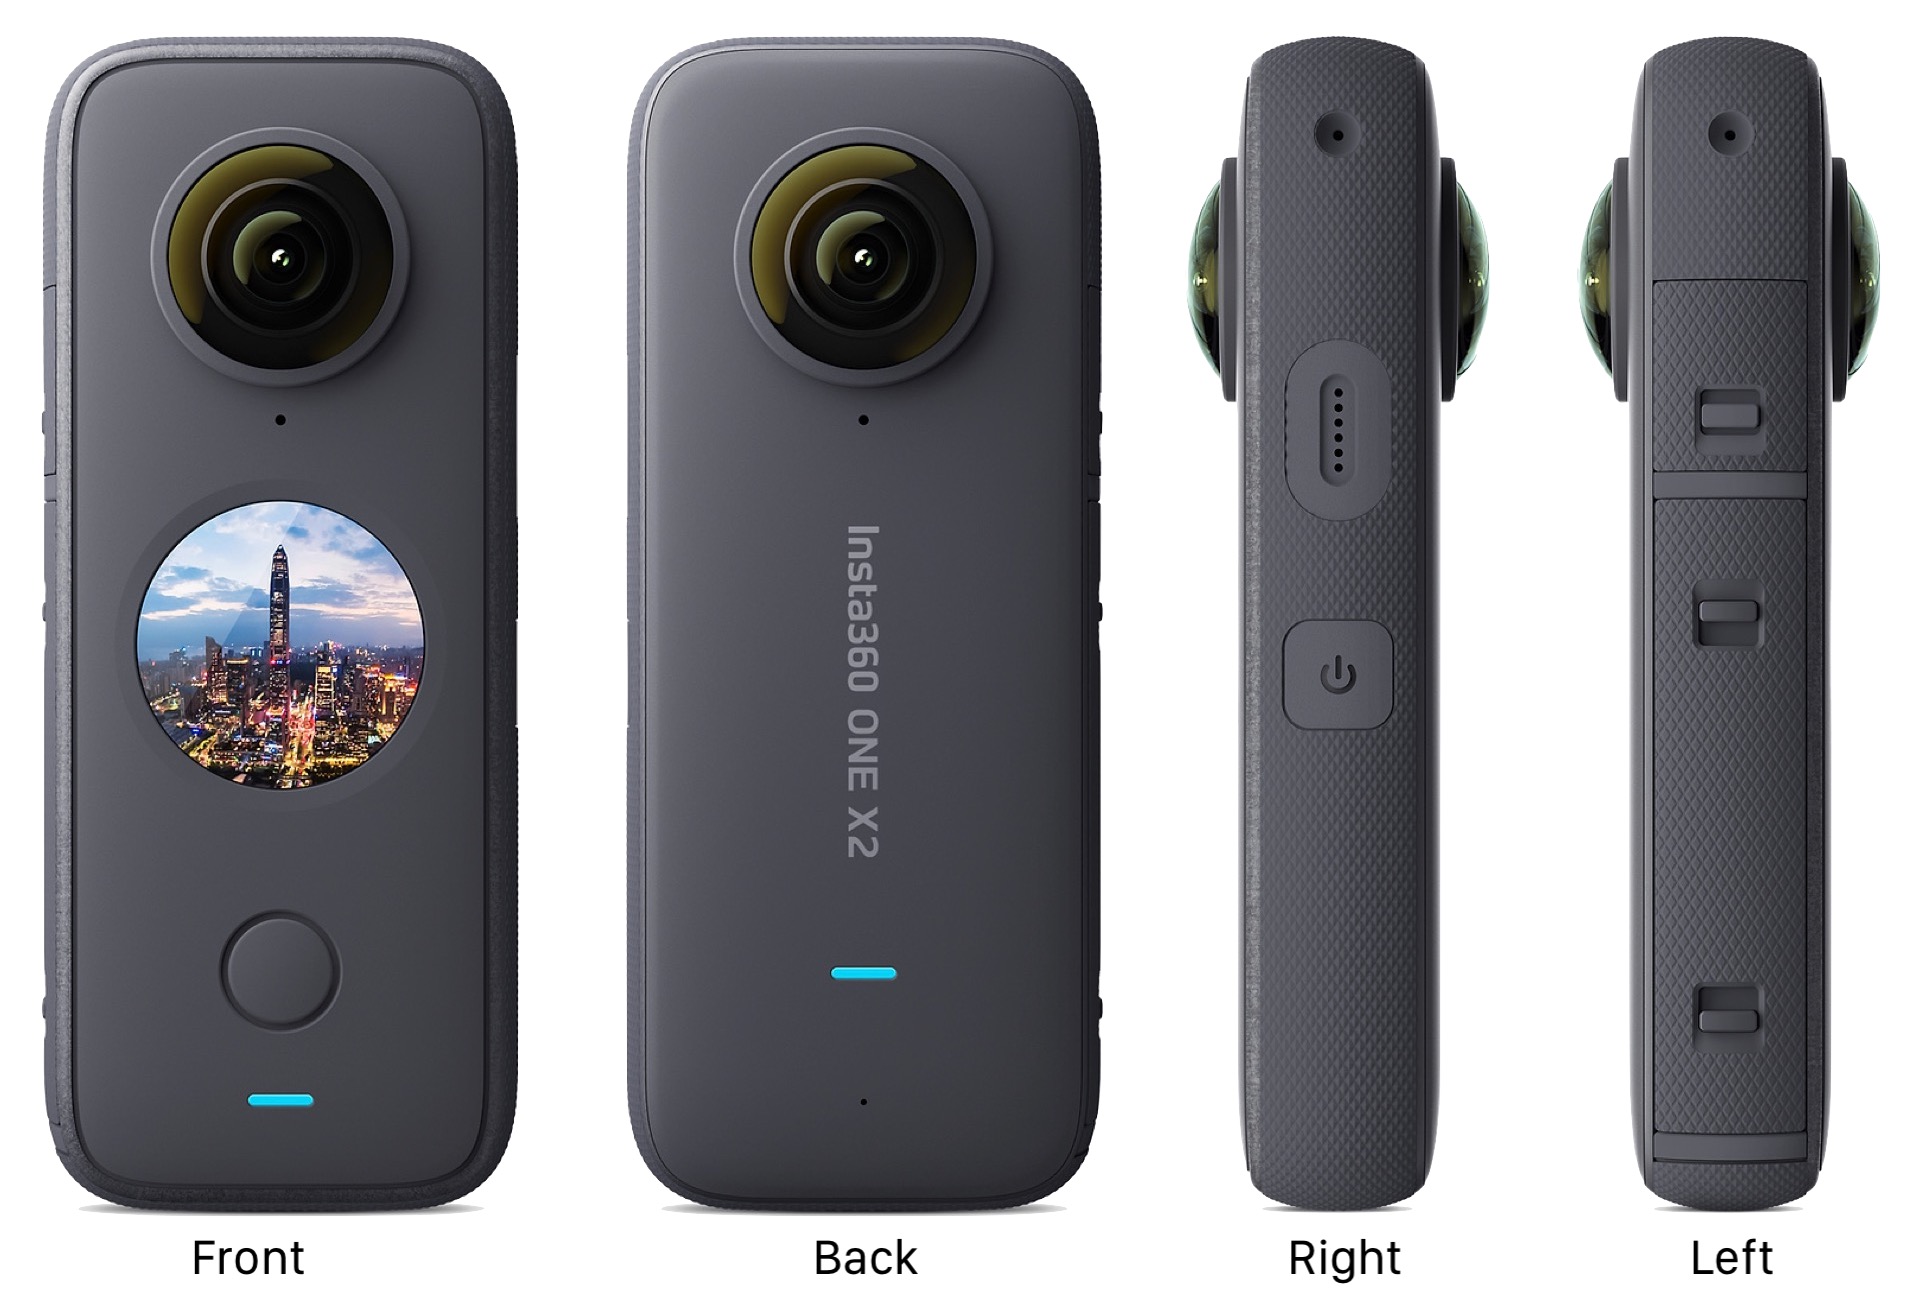 First Look: Insta360 ONE X2 Steady Cam - TidBITS